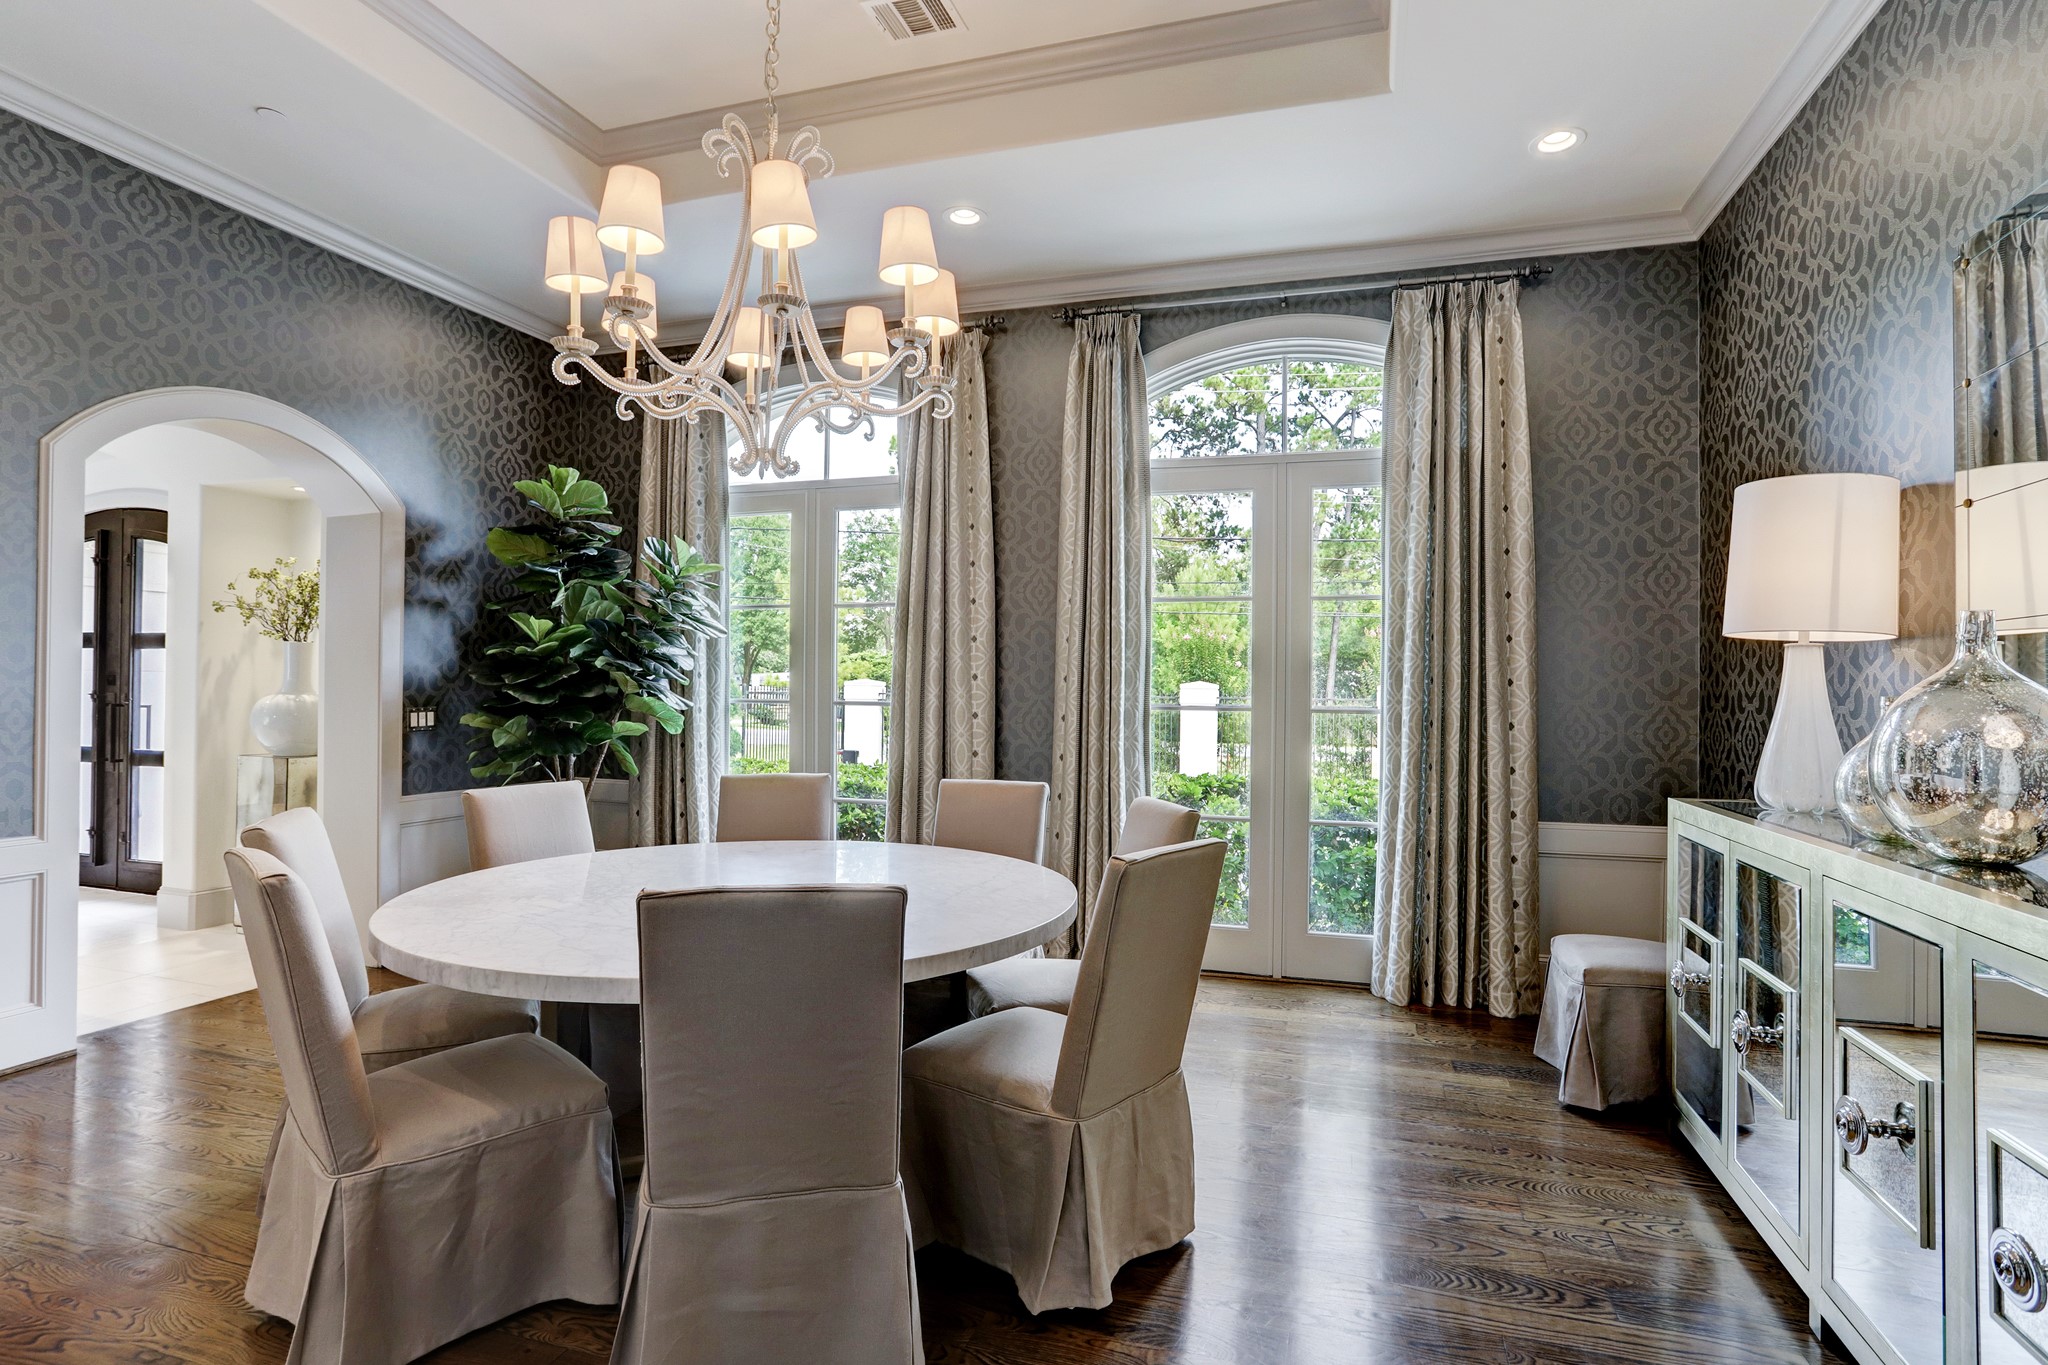 Large dining with beautiful chandelier and lighting